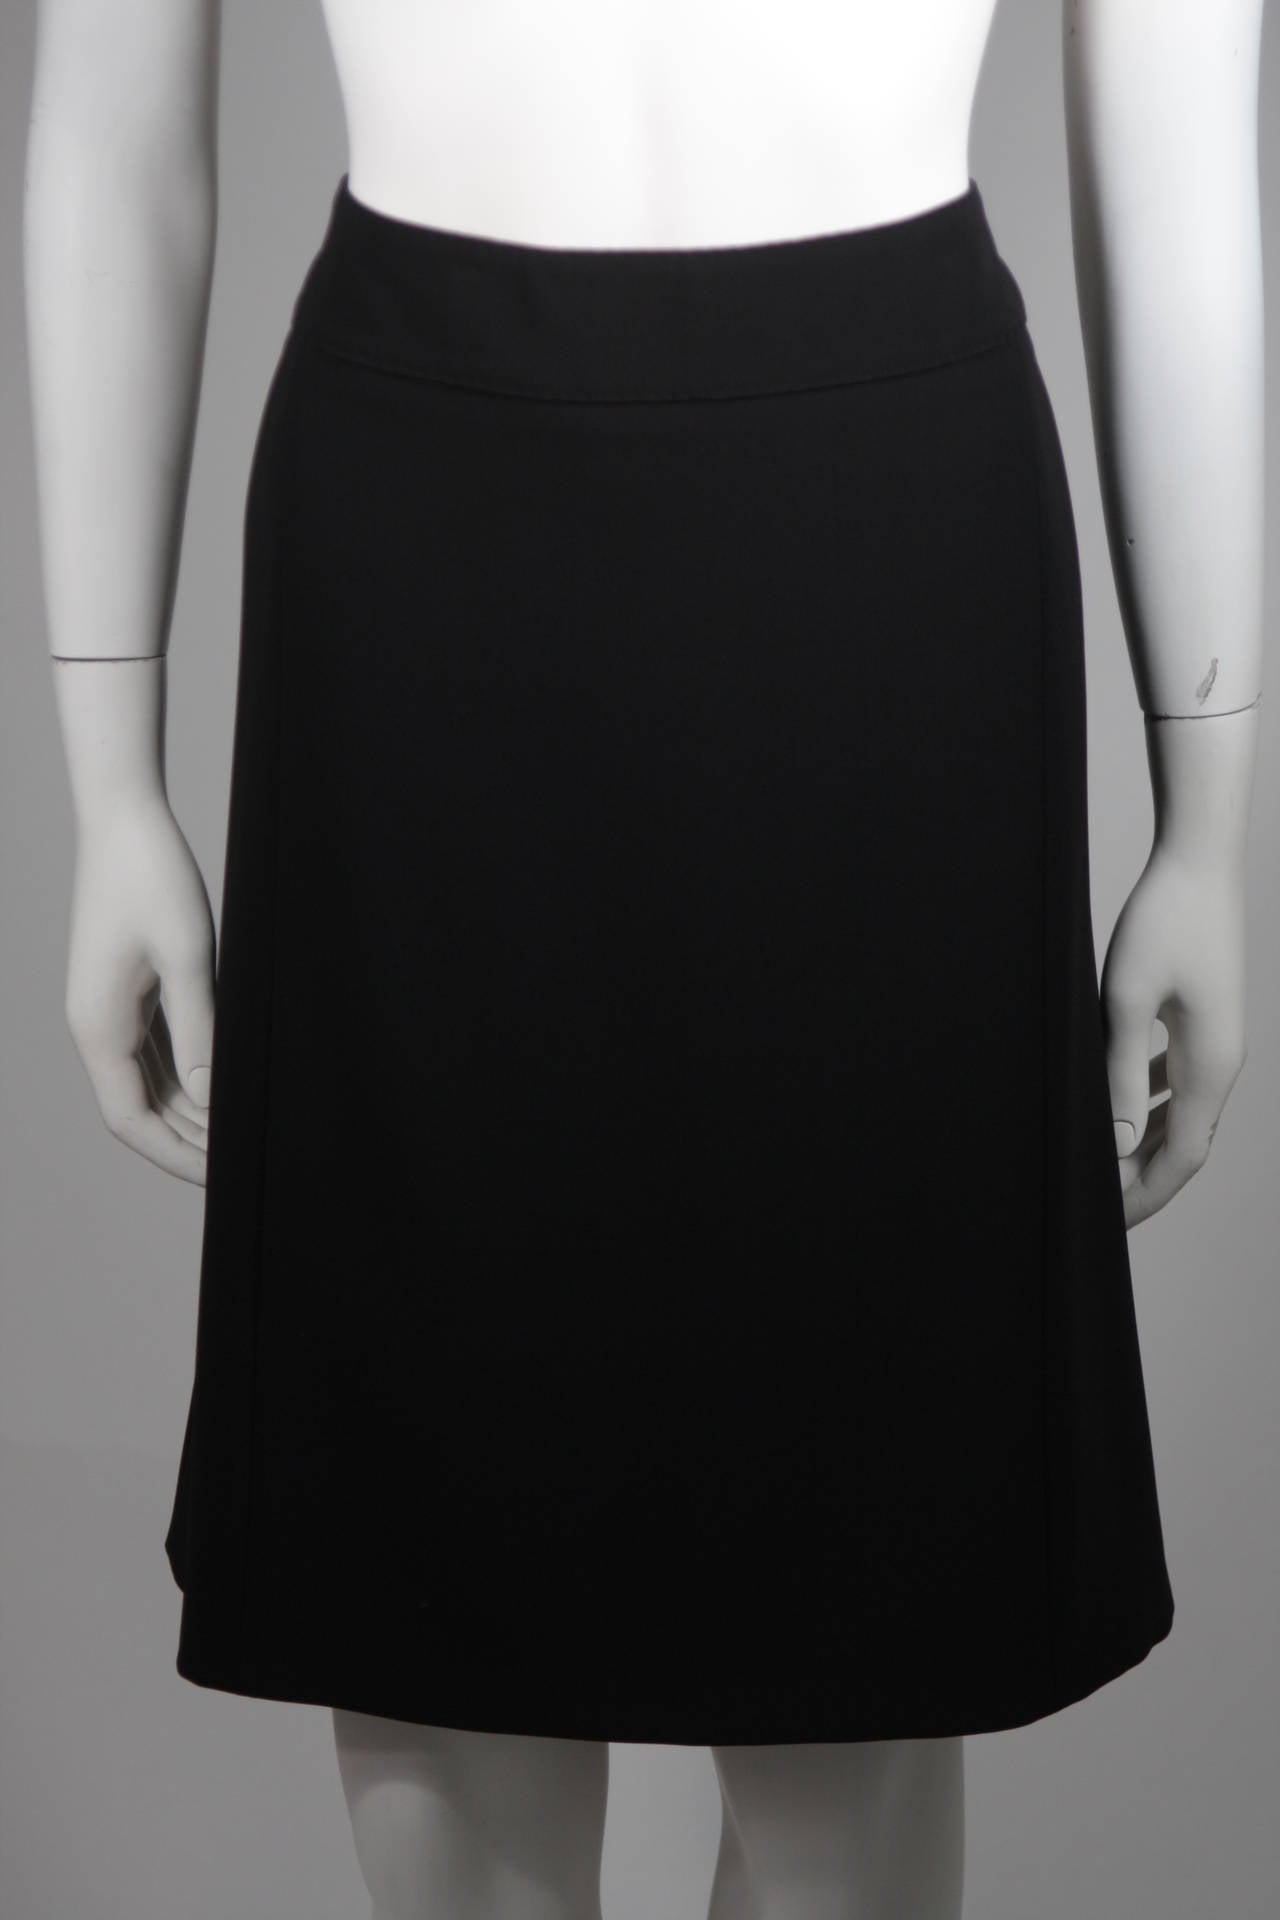 Moschino Black Skirt Suit with Silk Bow Detailing Size 12 For Sale 5